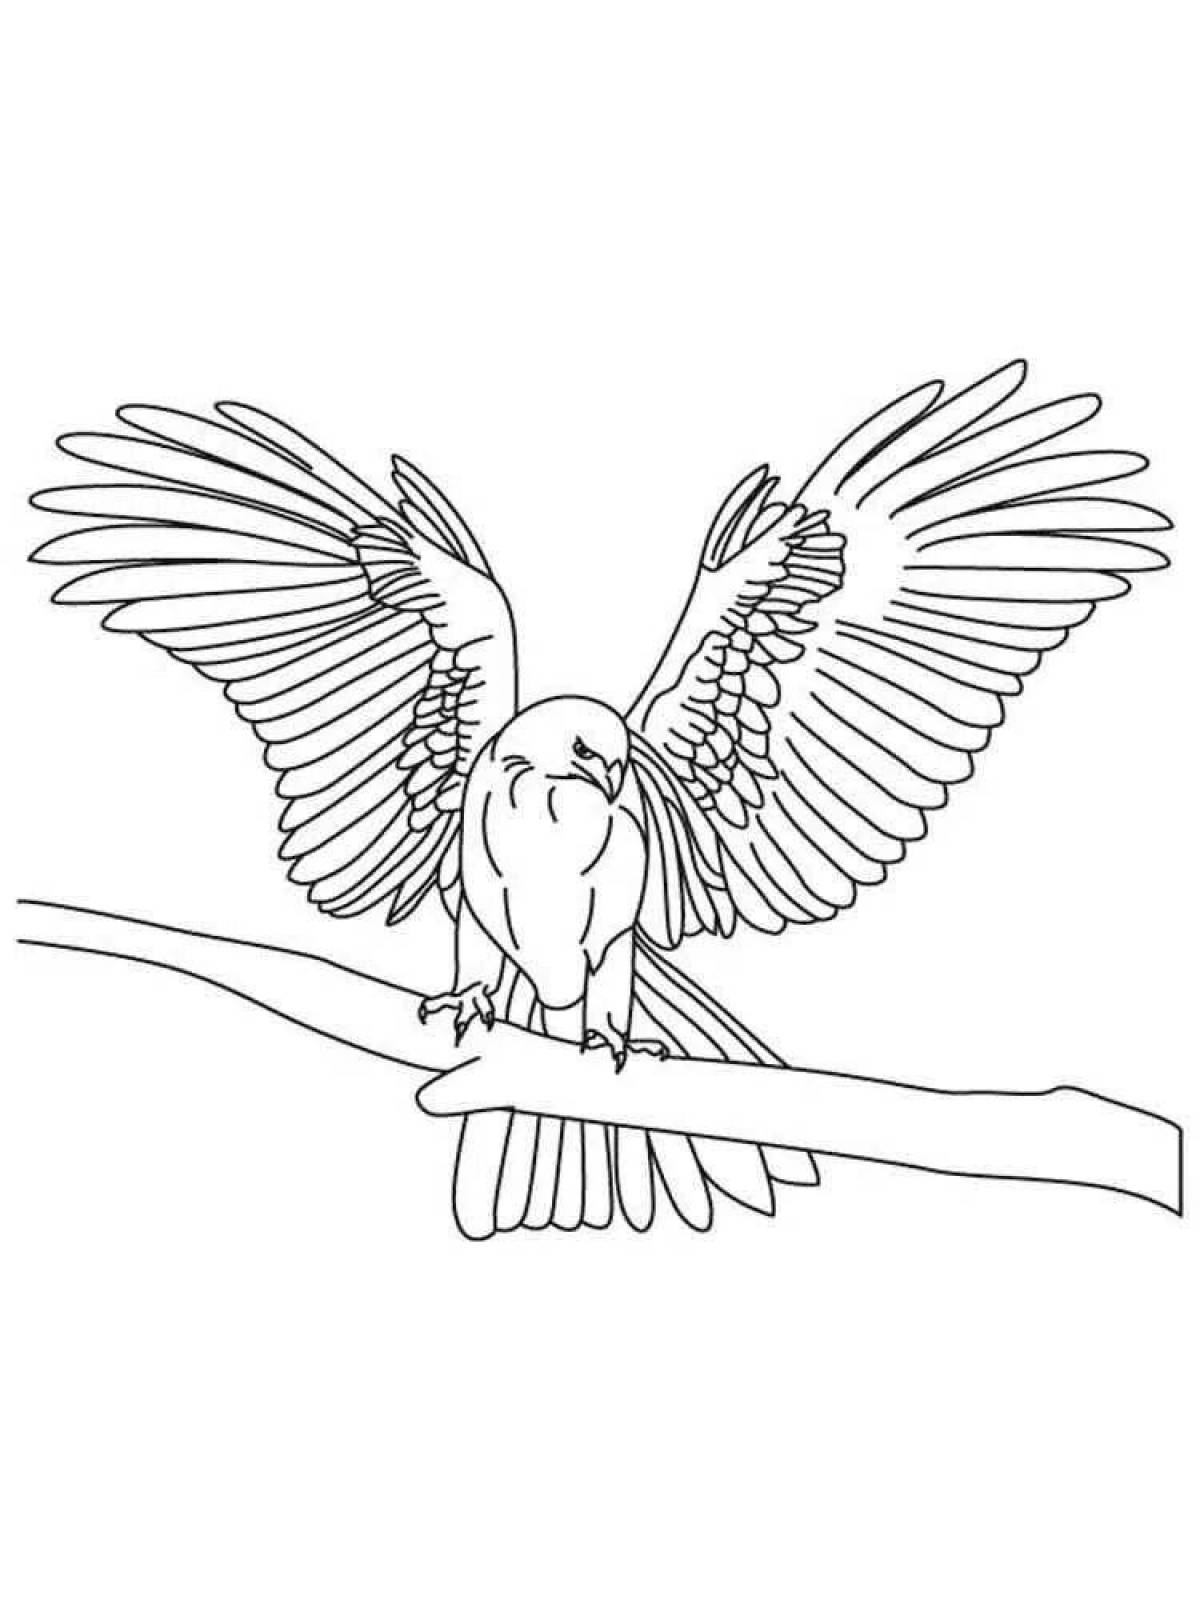 Coloring page graceful falcon